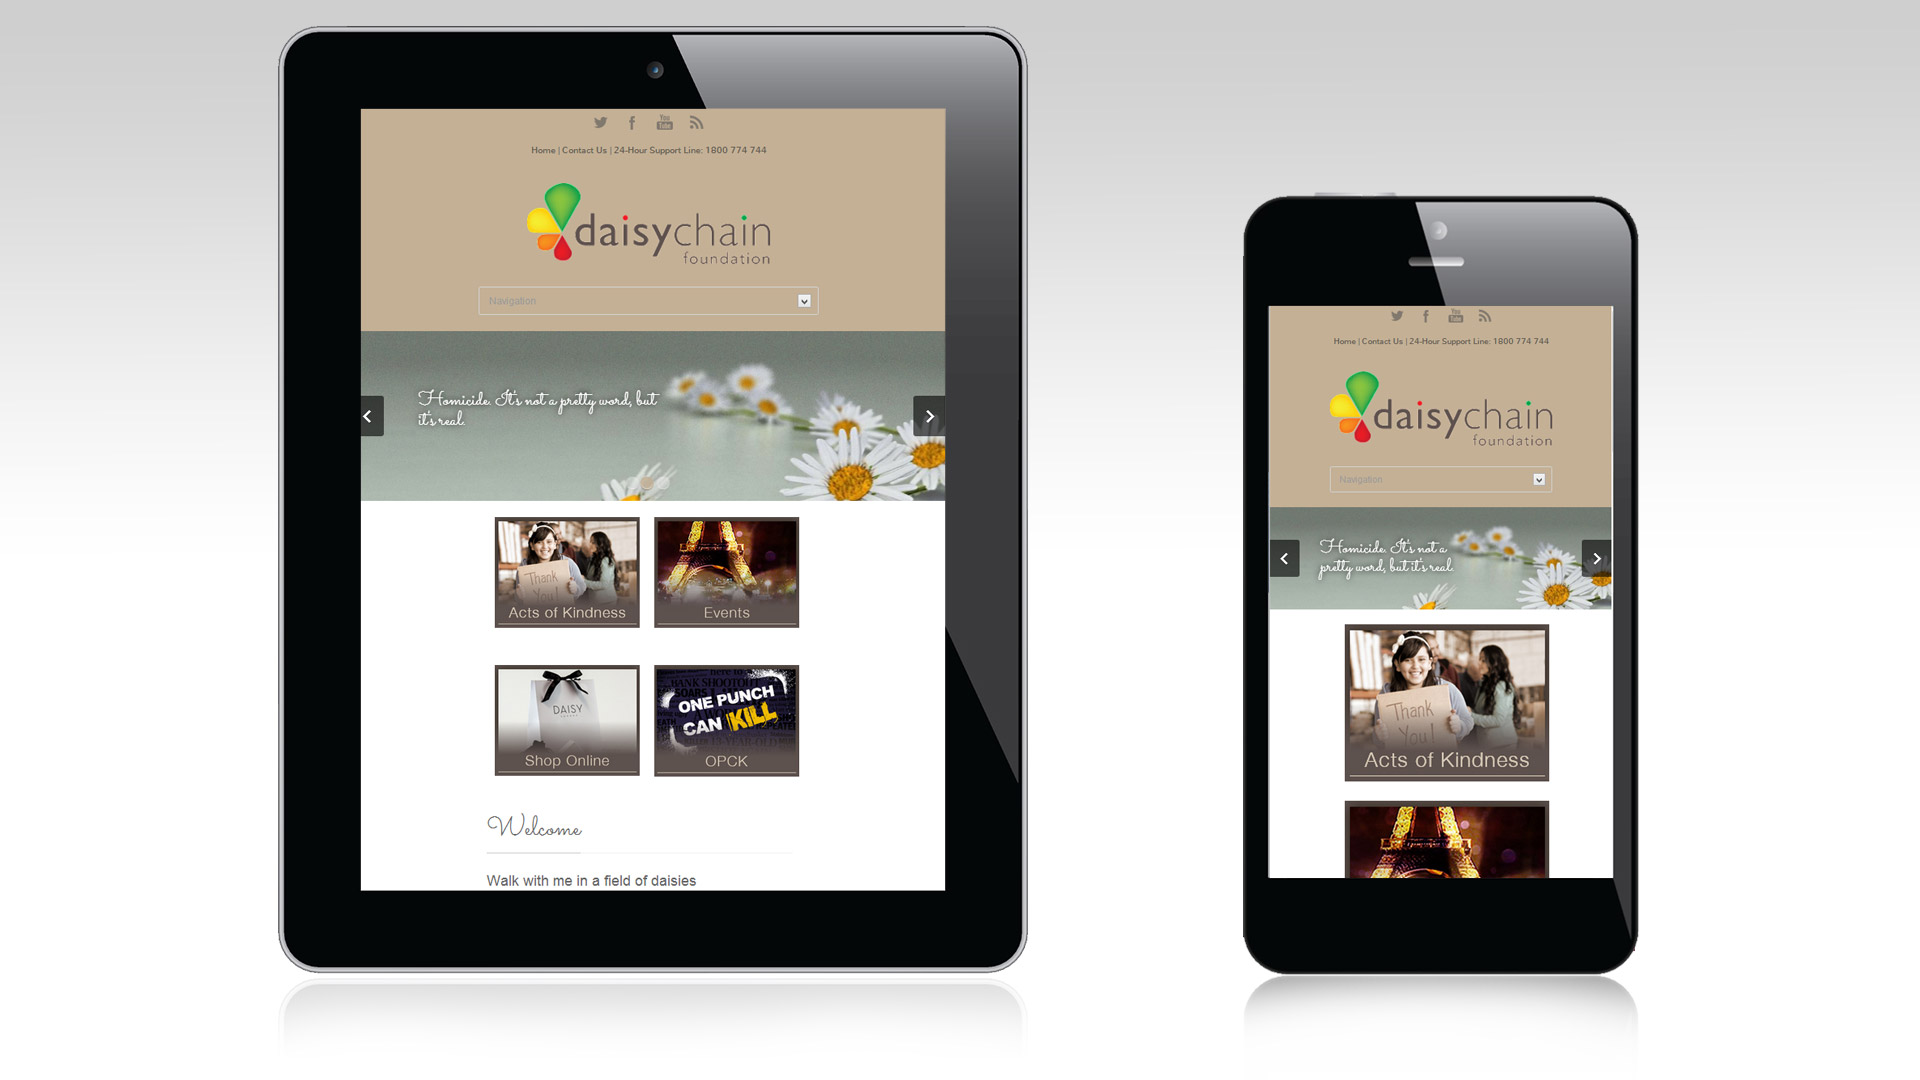 Daisychain Foundation mobile and tablet mockup views